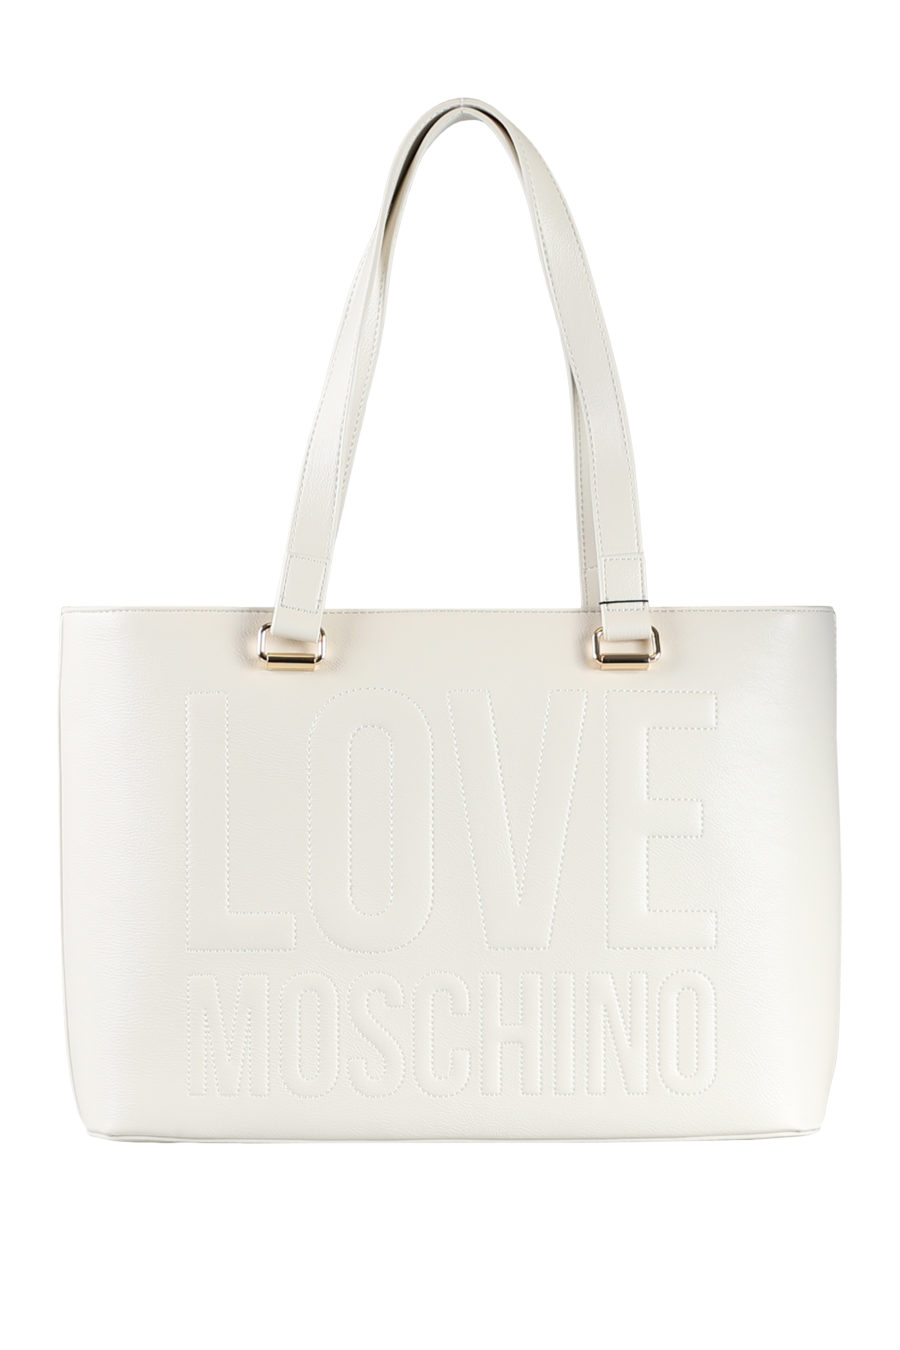 White "Shopper" bag with embroidered logo - IMG 1602